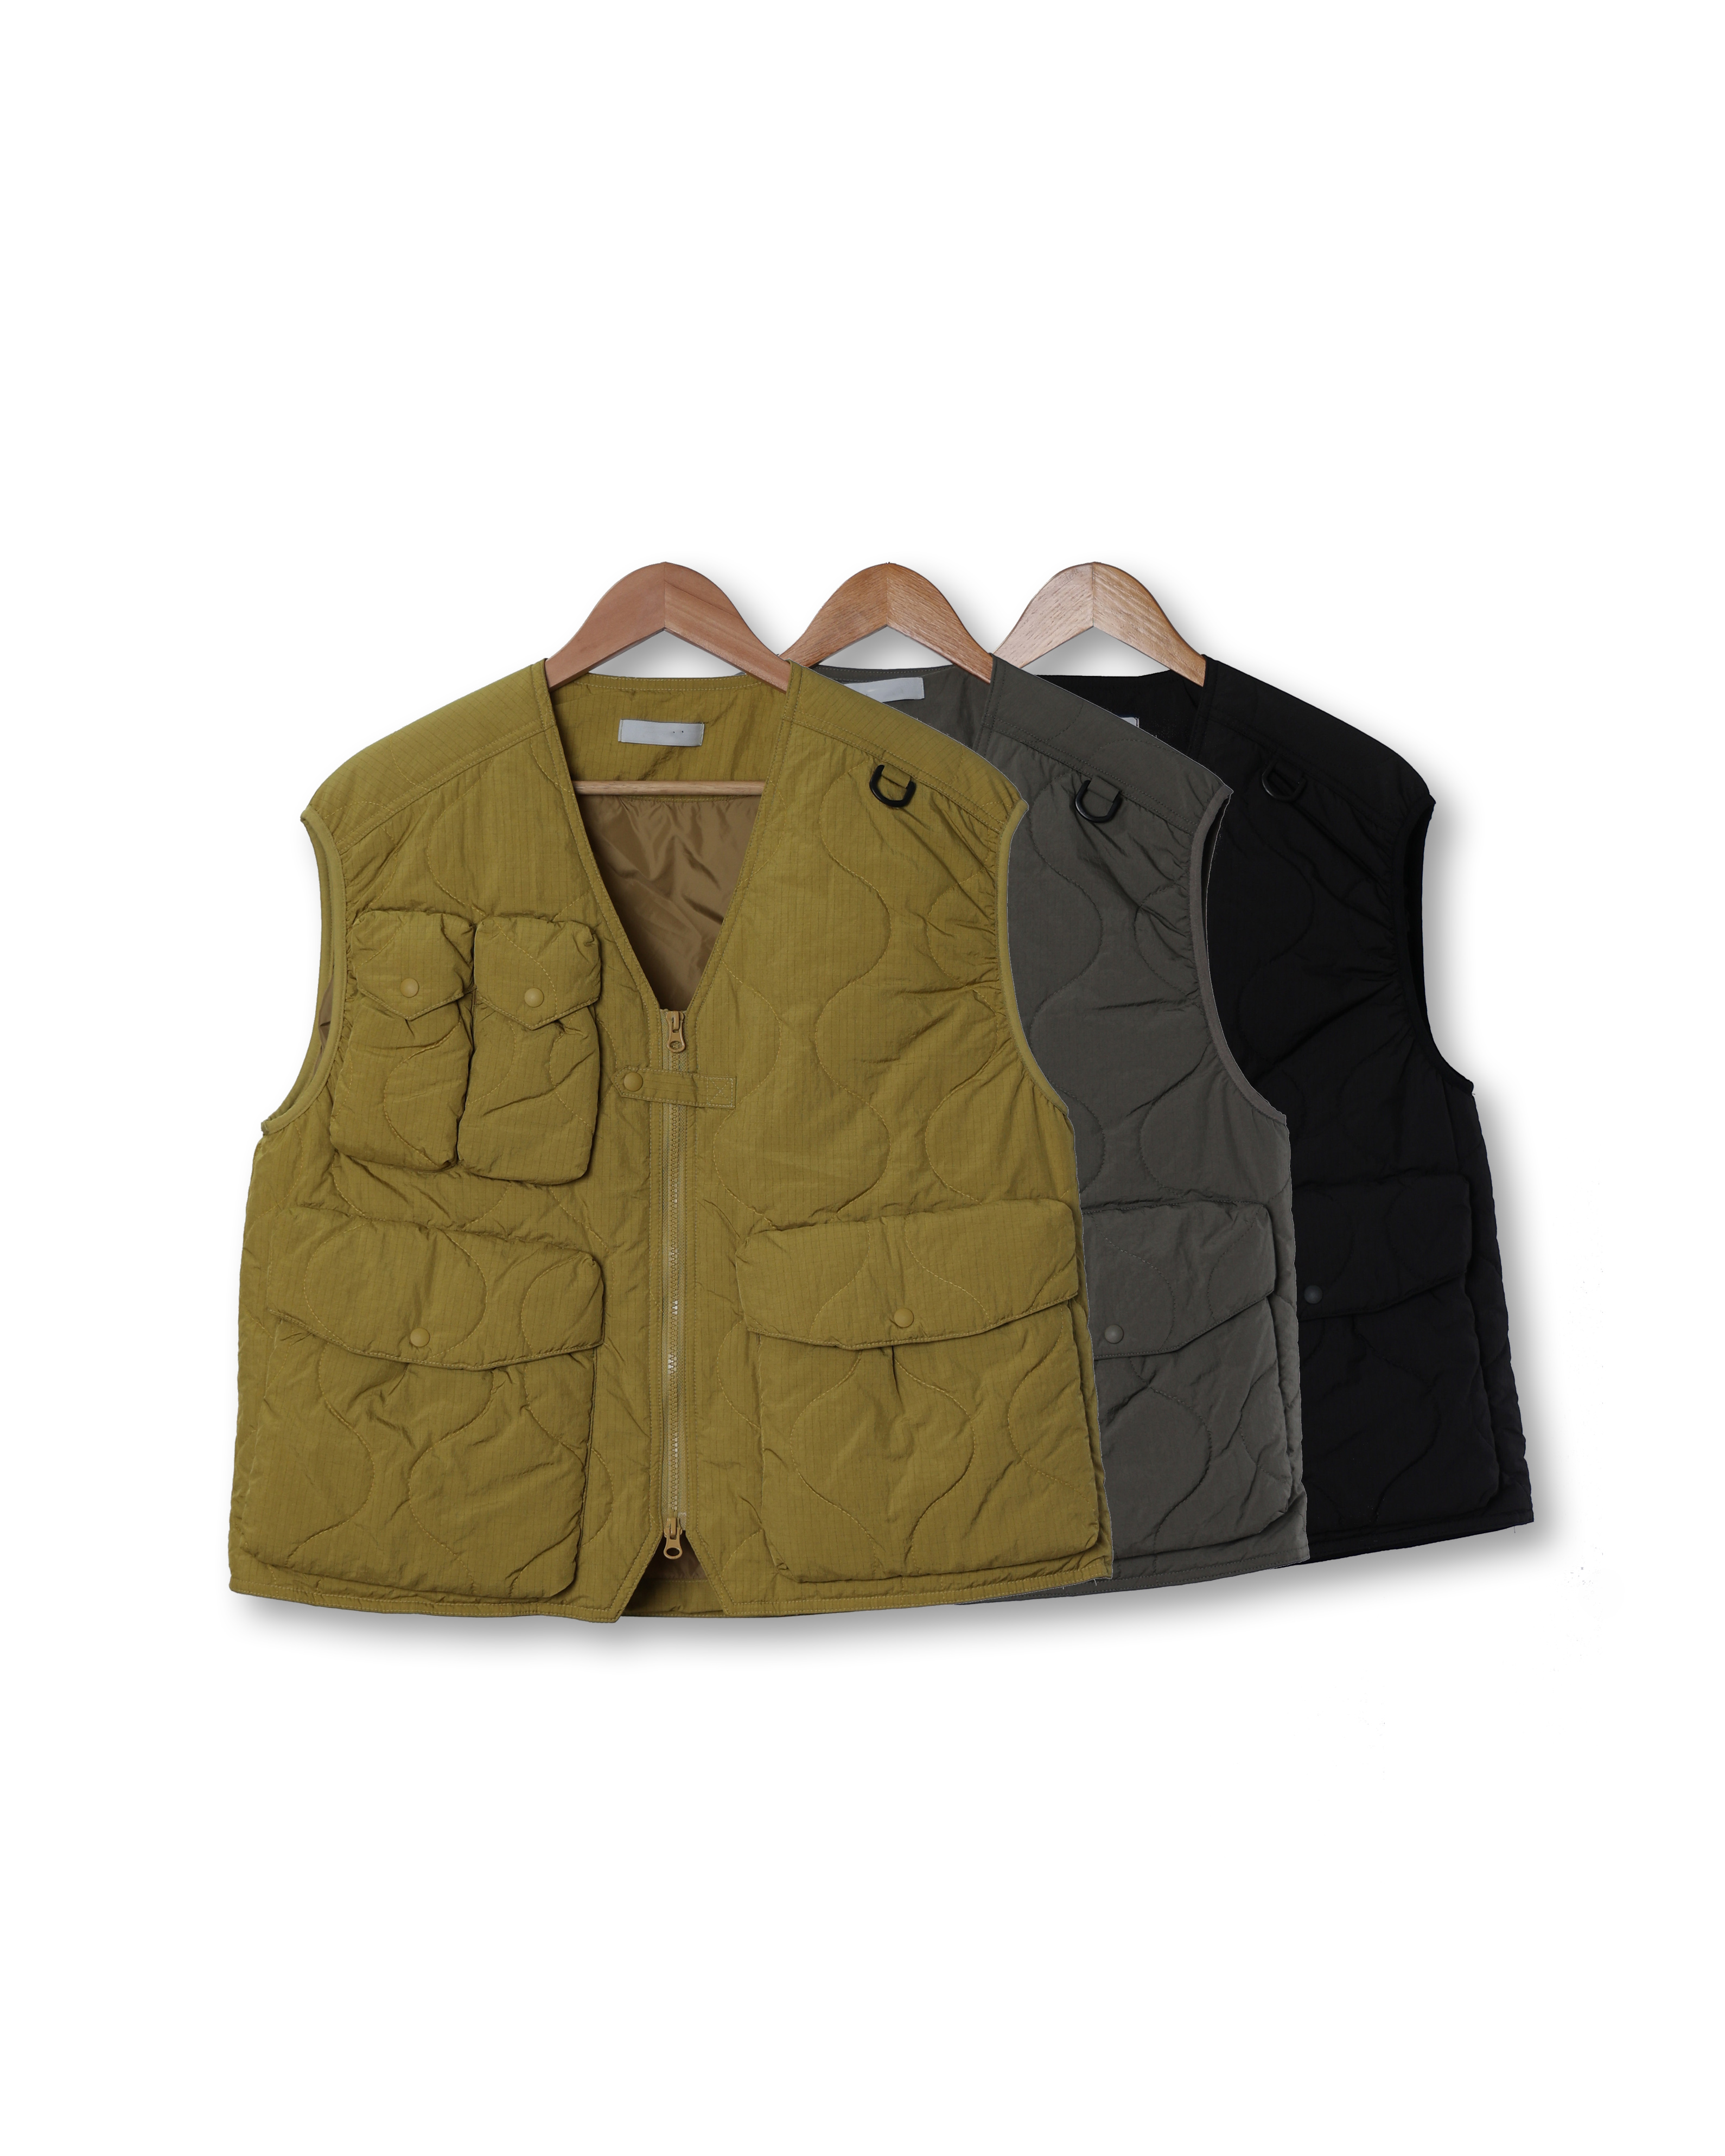 SPECT Combat Curve Quilted Mil Vest (Black/Light Charcoal/Yellow)